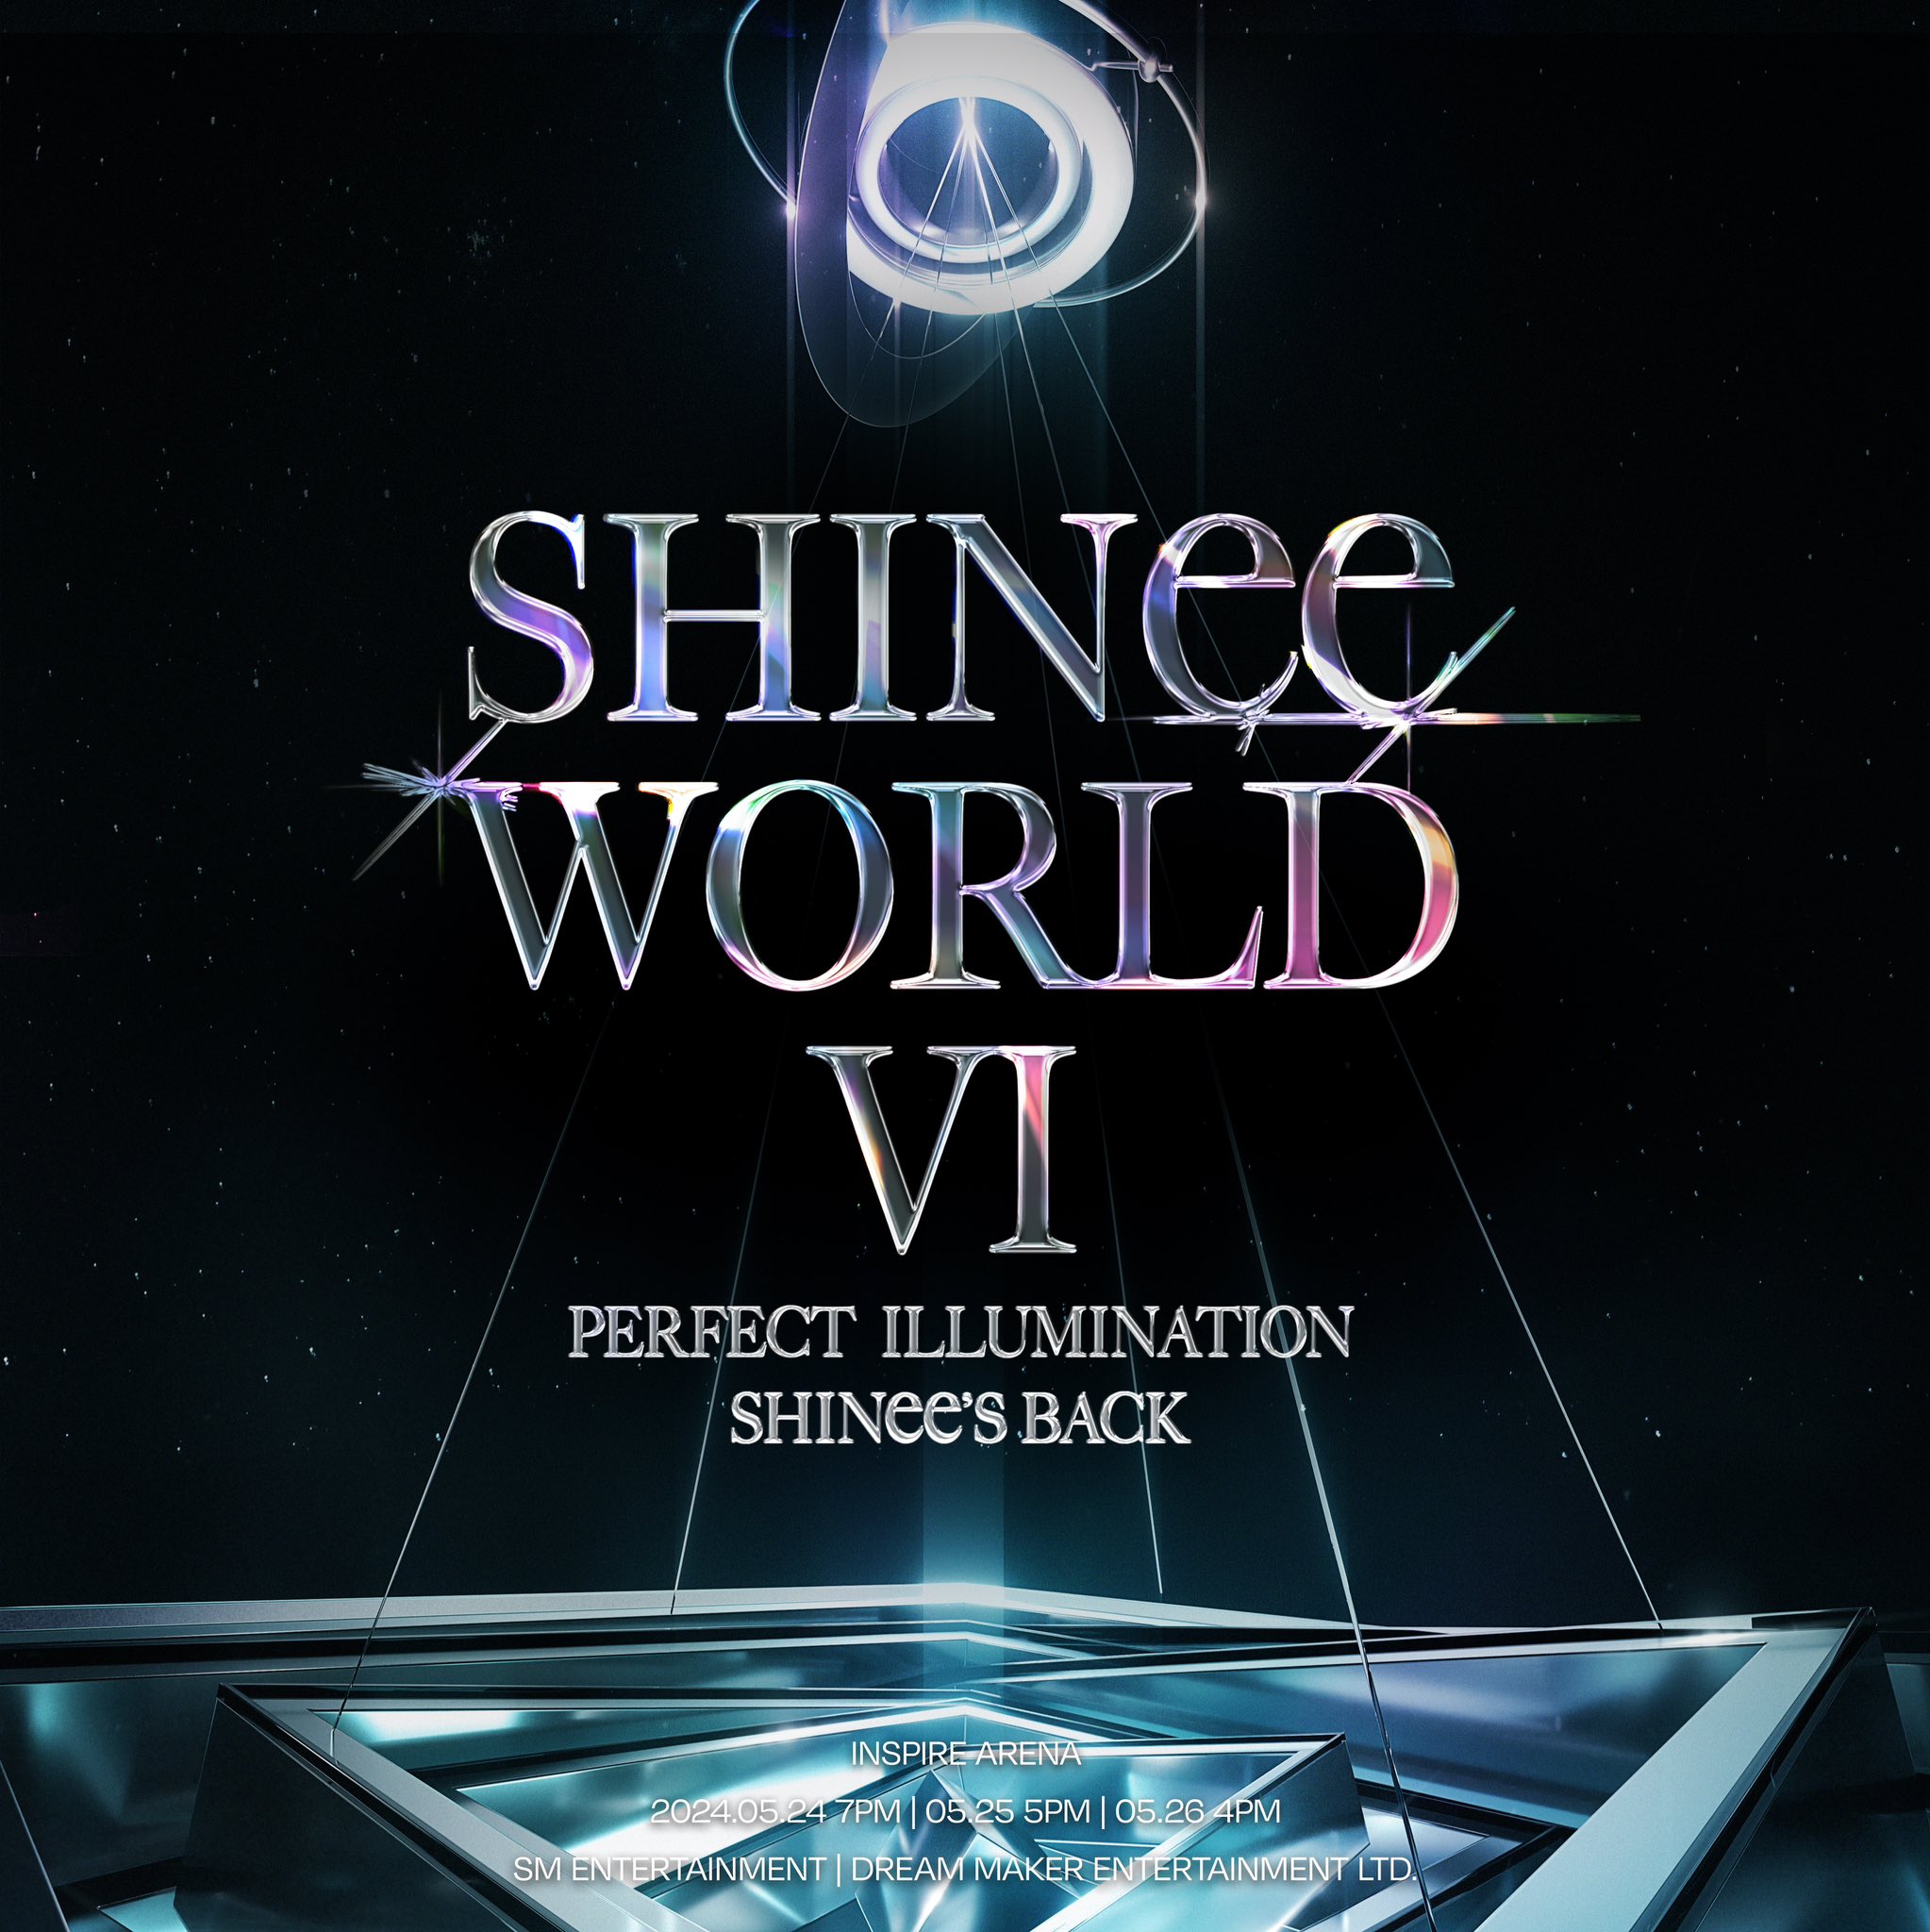 SHINee To Hold Encore Concert As Full Group Following Onew's Return